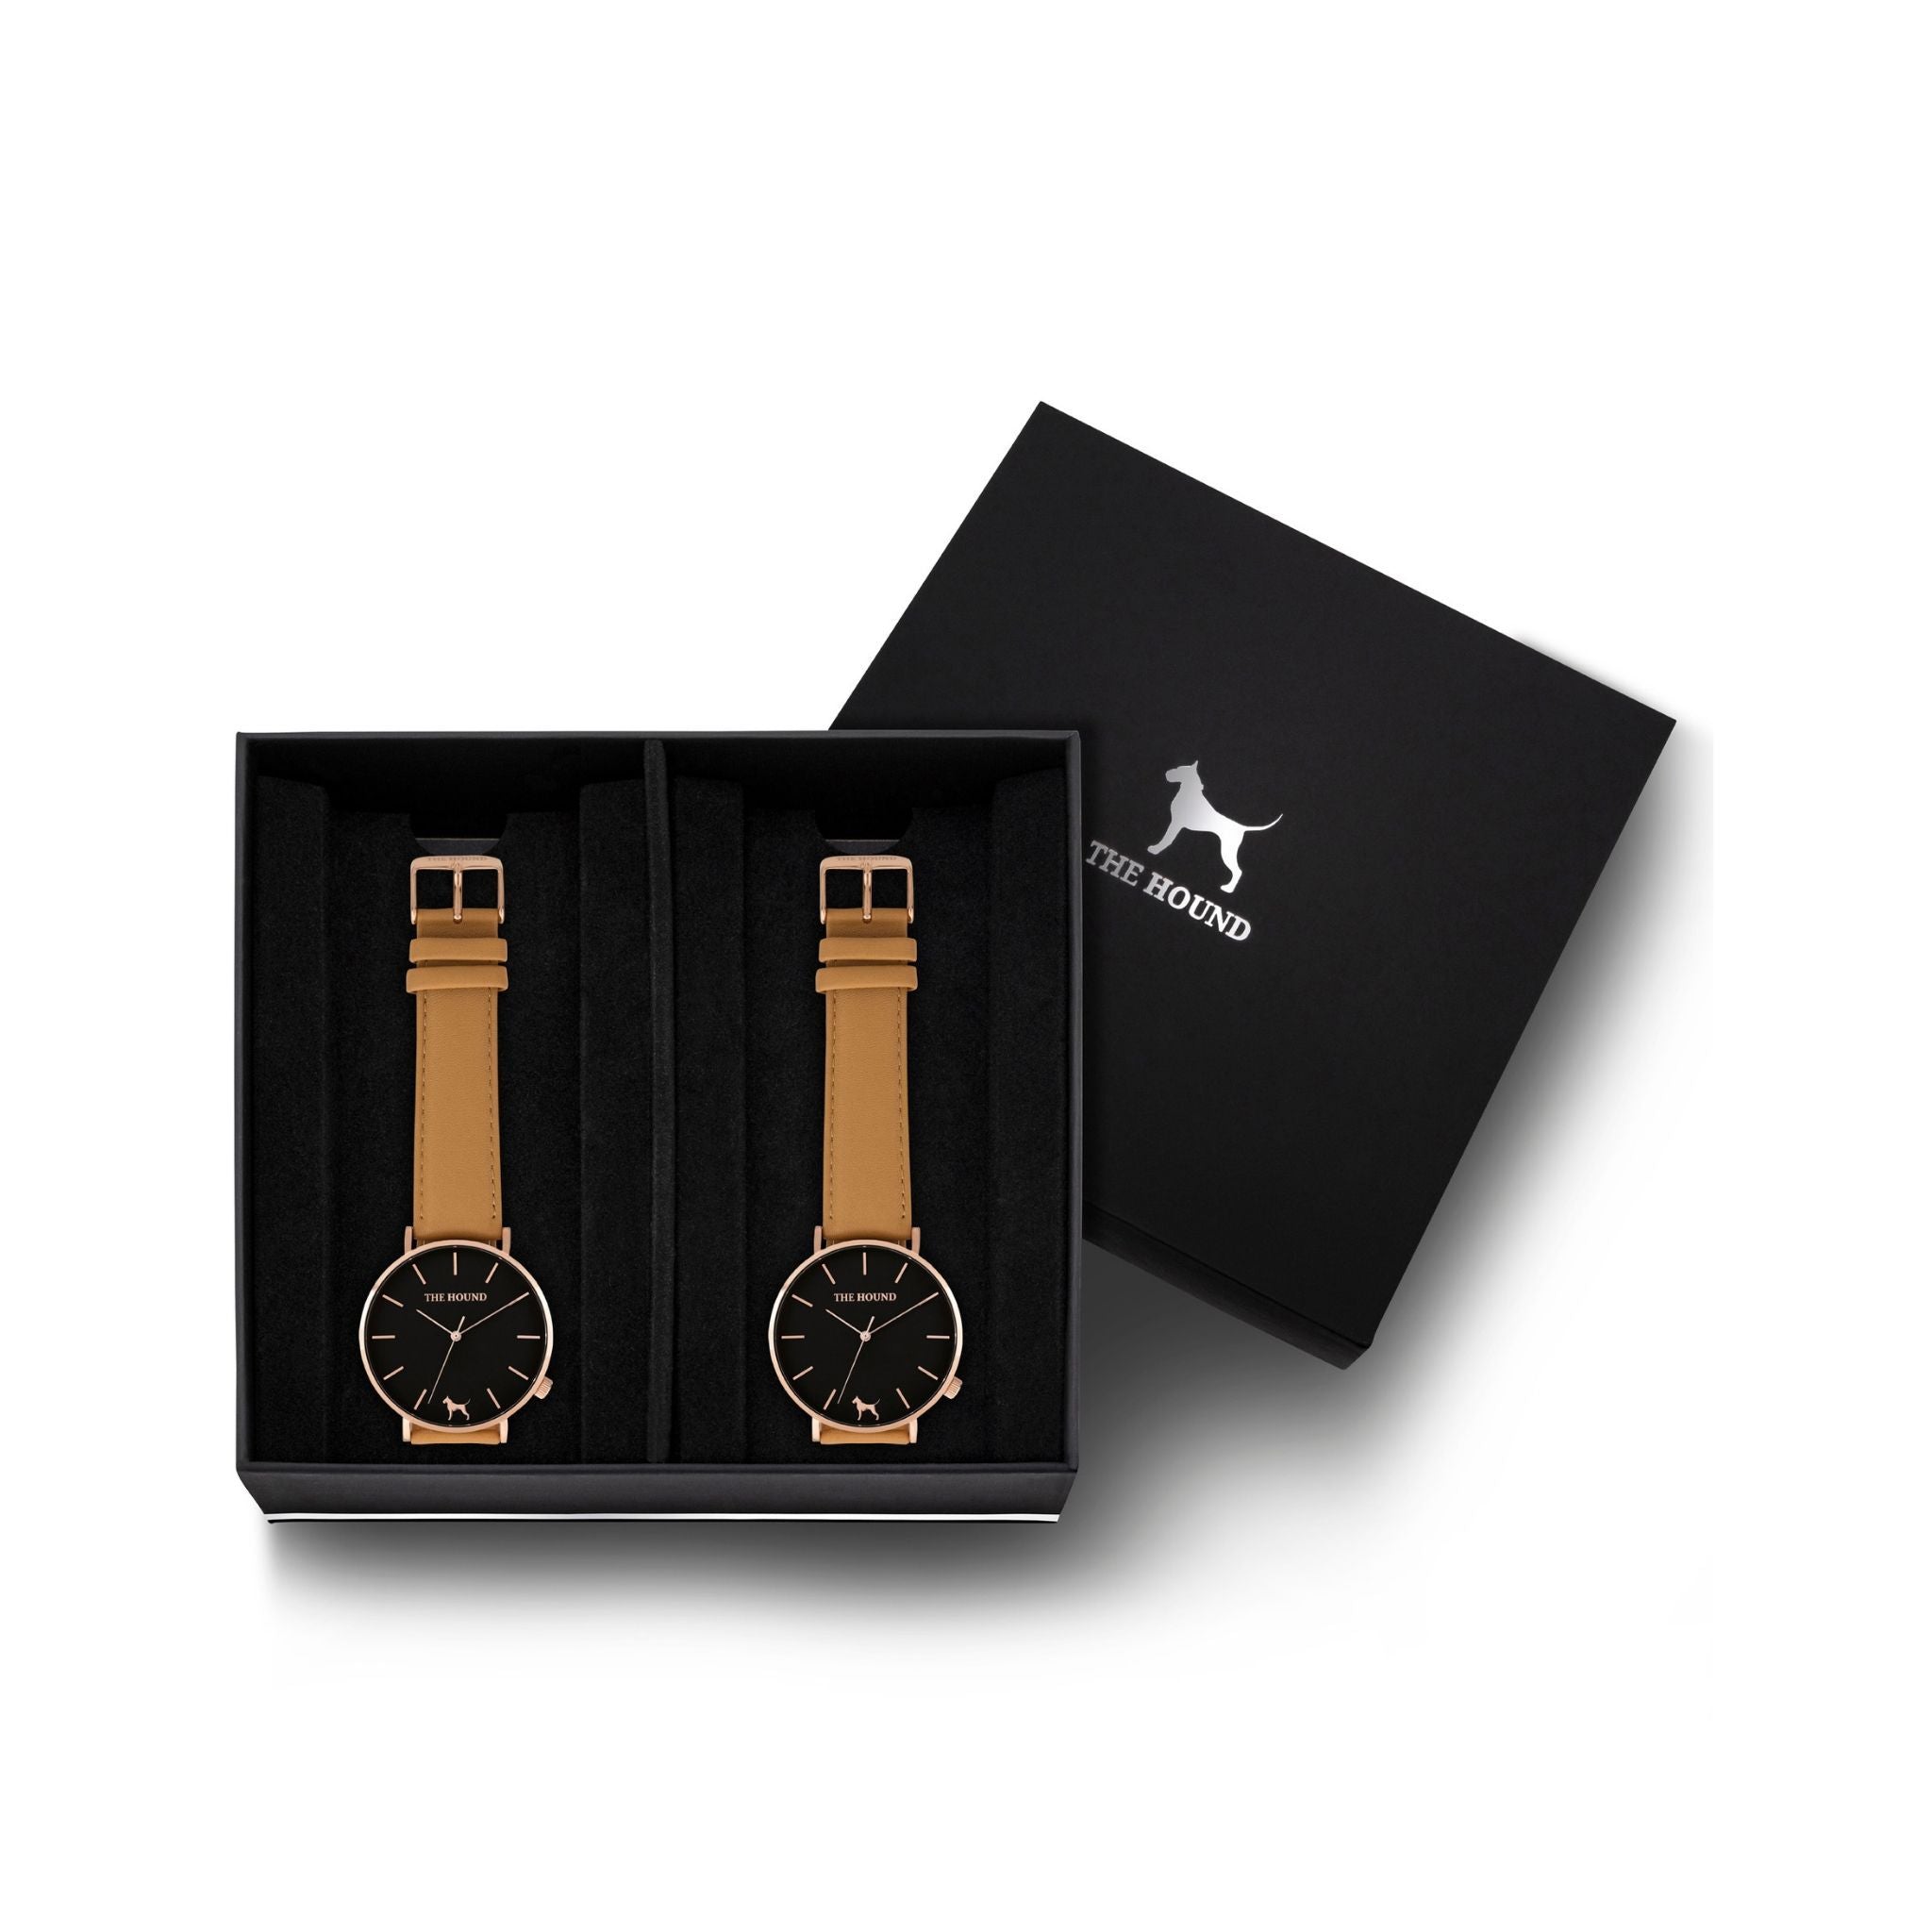 Custom gift set - Rose gold and black watch with stitched camel genuine leather band and a rose gold and black watch with stitched camel genuine leather band